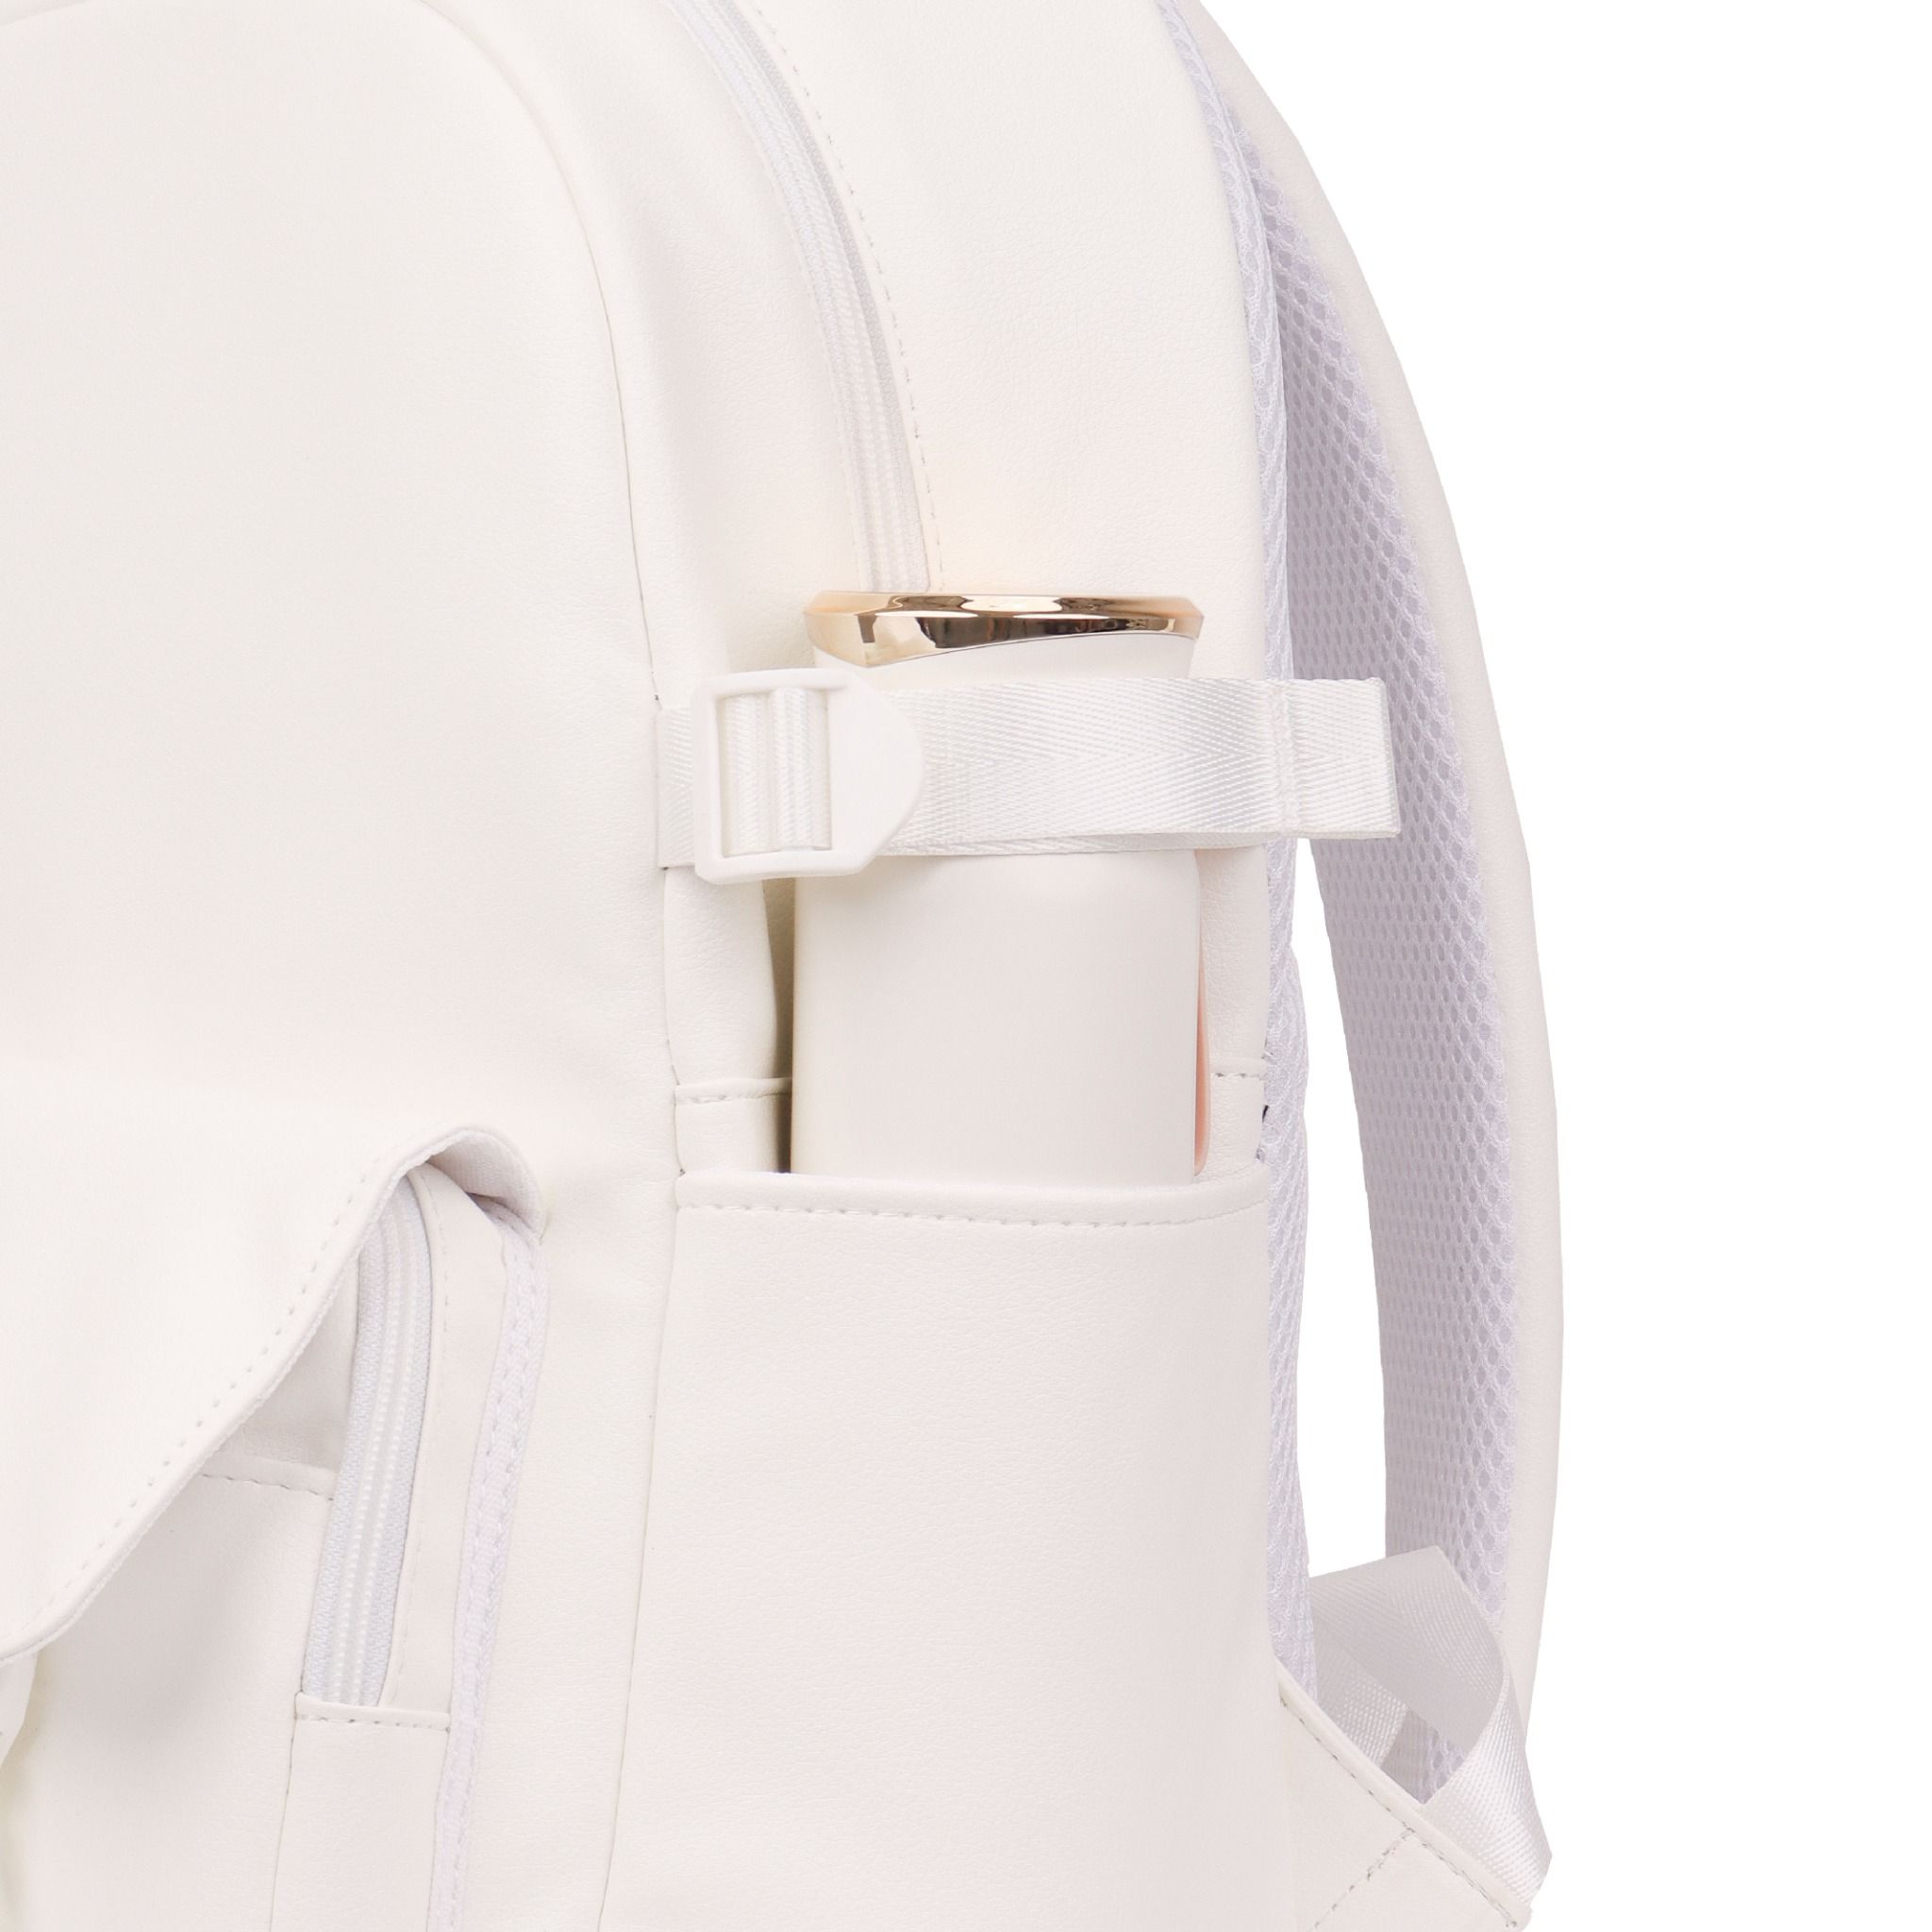  Chapter Backpack - White 